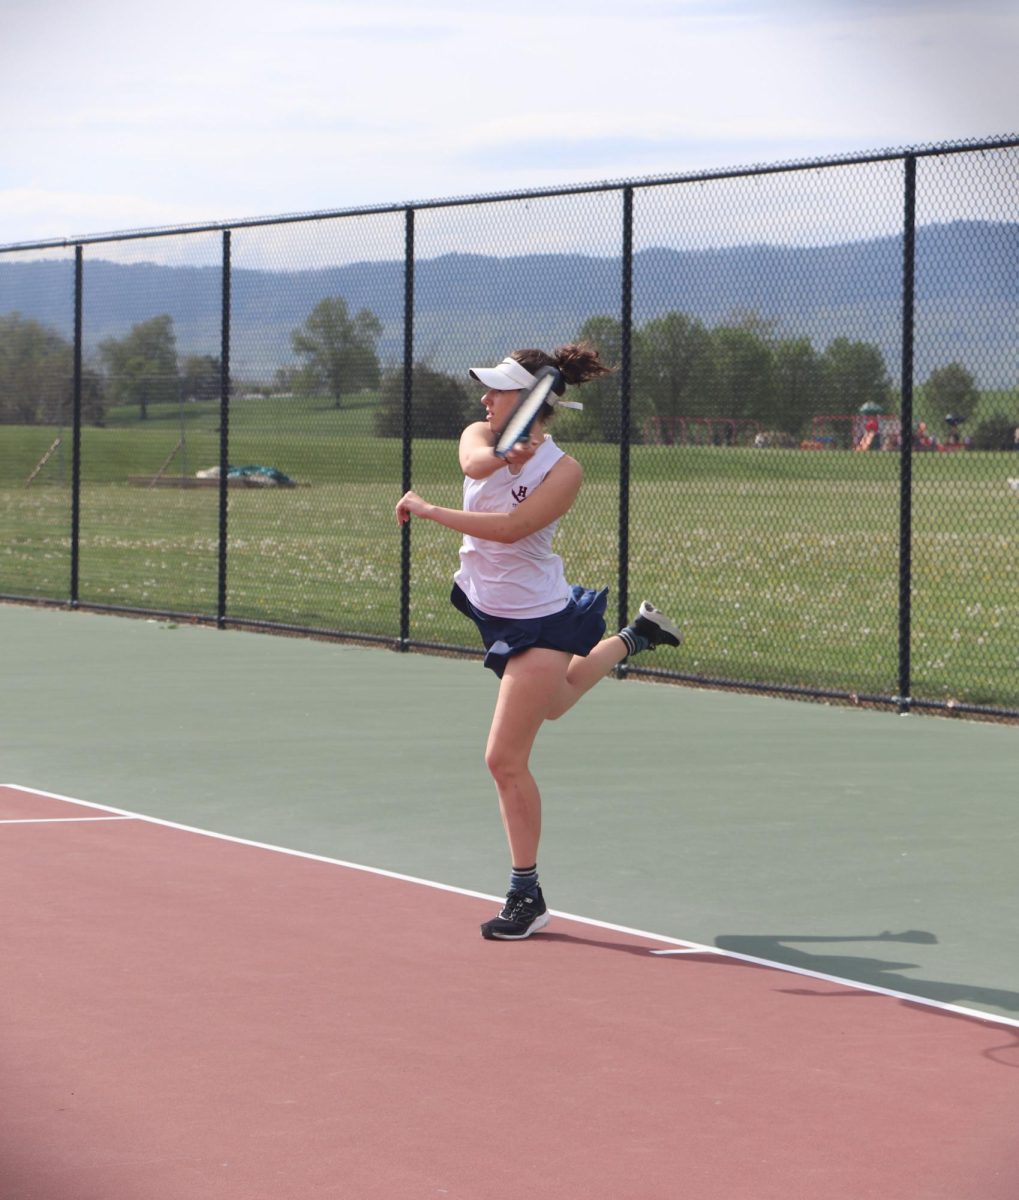 Senior Caryanne Shaw volleys back during her first game at ERHS. 4-19